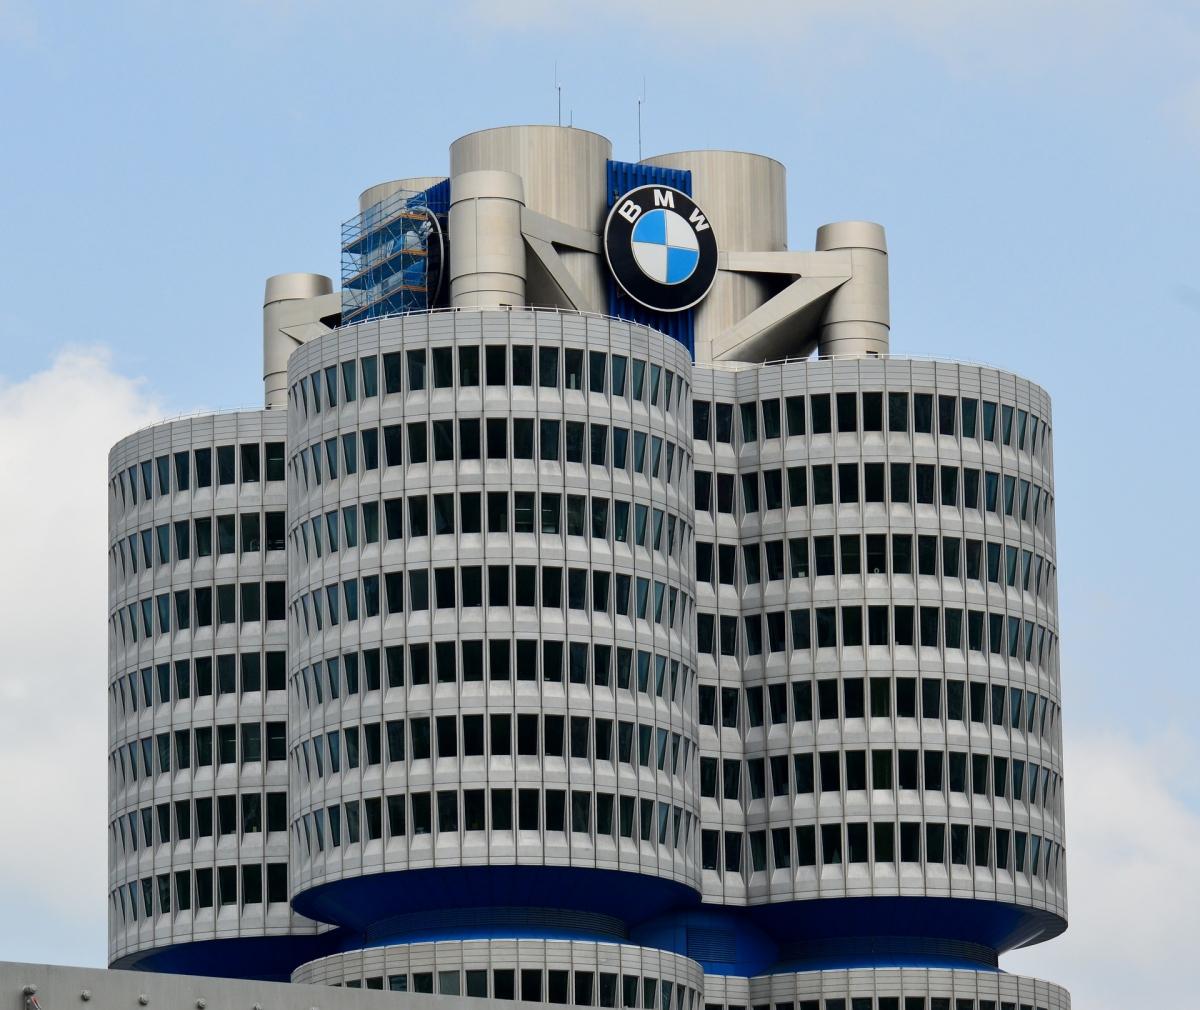 BMW employees brace for biggest downsizing in over a decade due to coronavirus